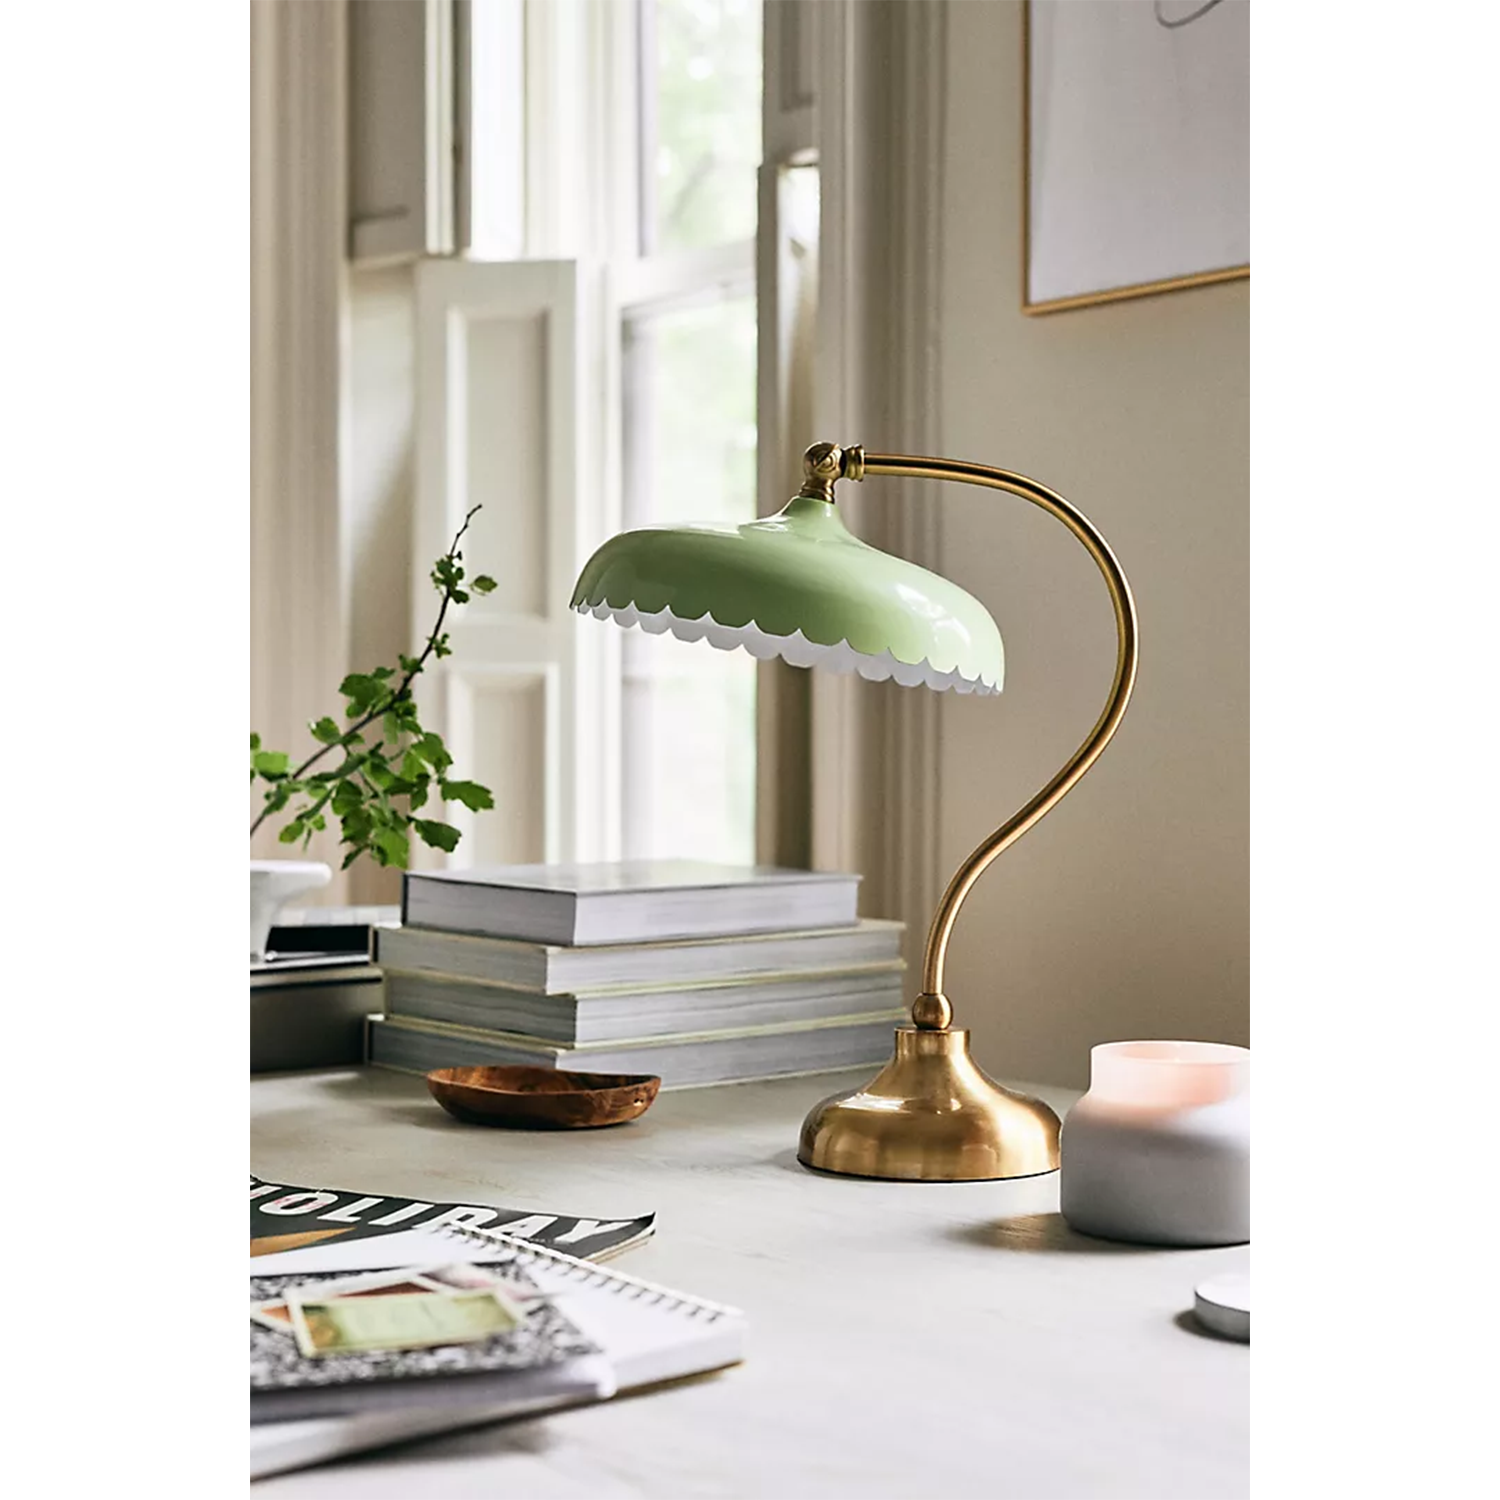 Simone Task Lamp with light green scalloped shade